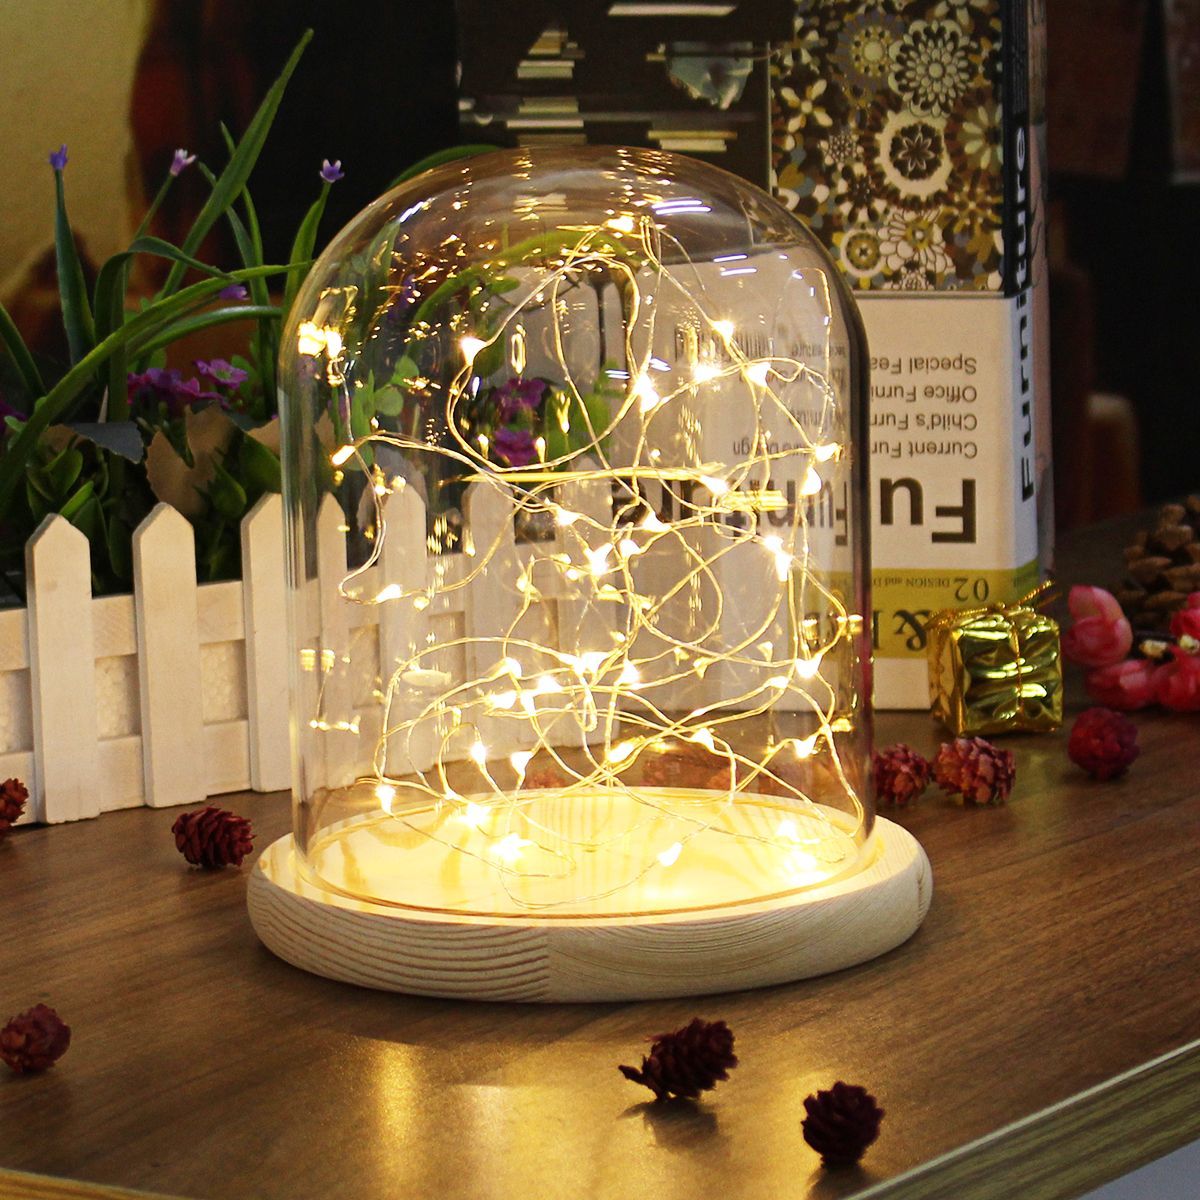 Clear-Glass-Display-Dome-Cloche-Bell-Jar-Wooden-Base-DIY-Decorations-With-20-LED-Fairy-String-Light-1361173